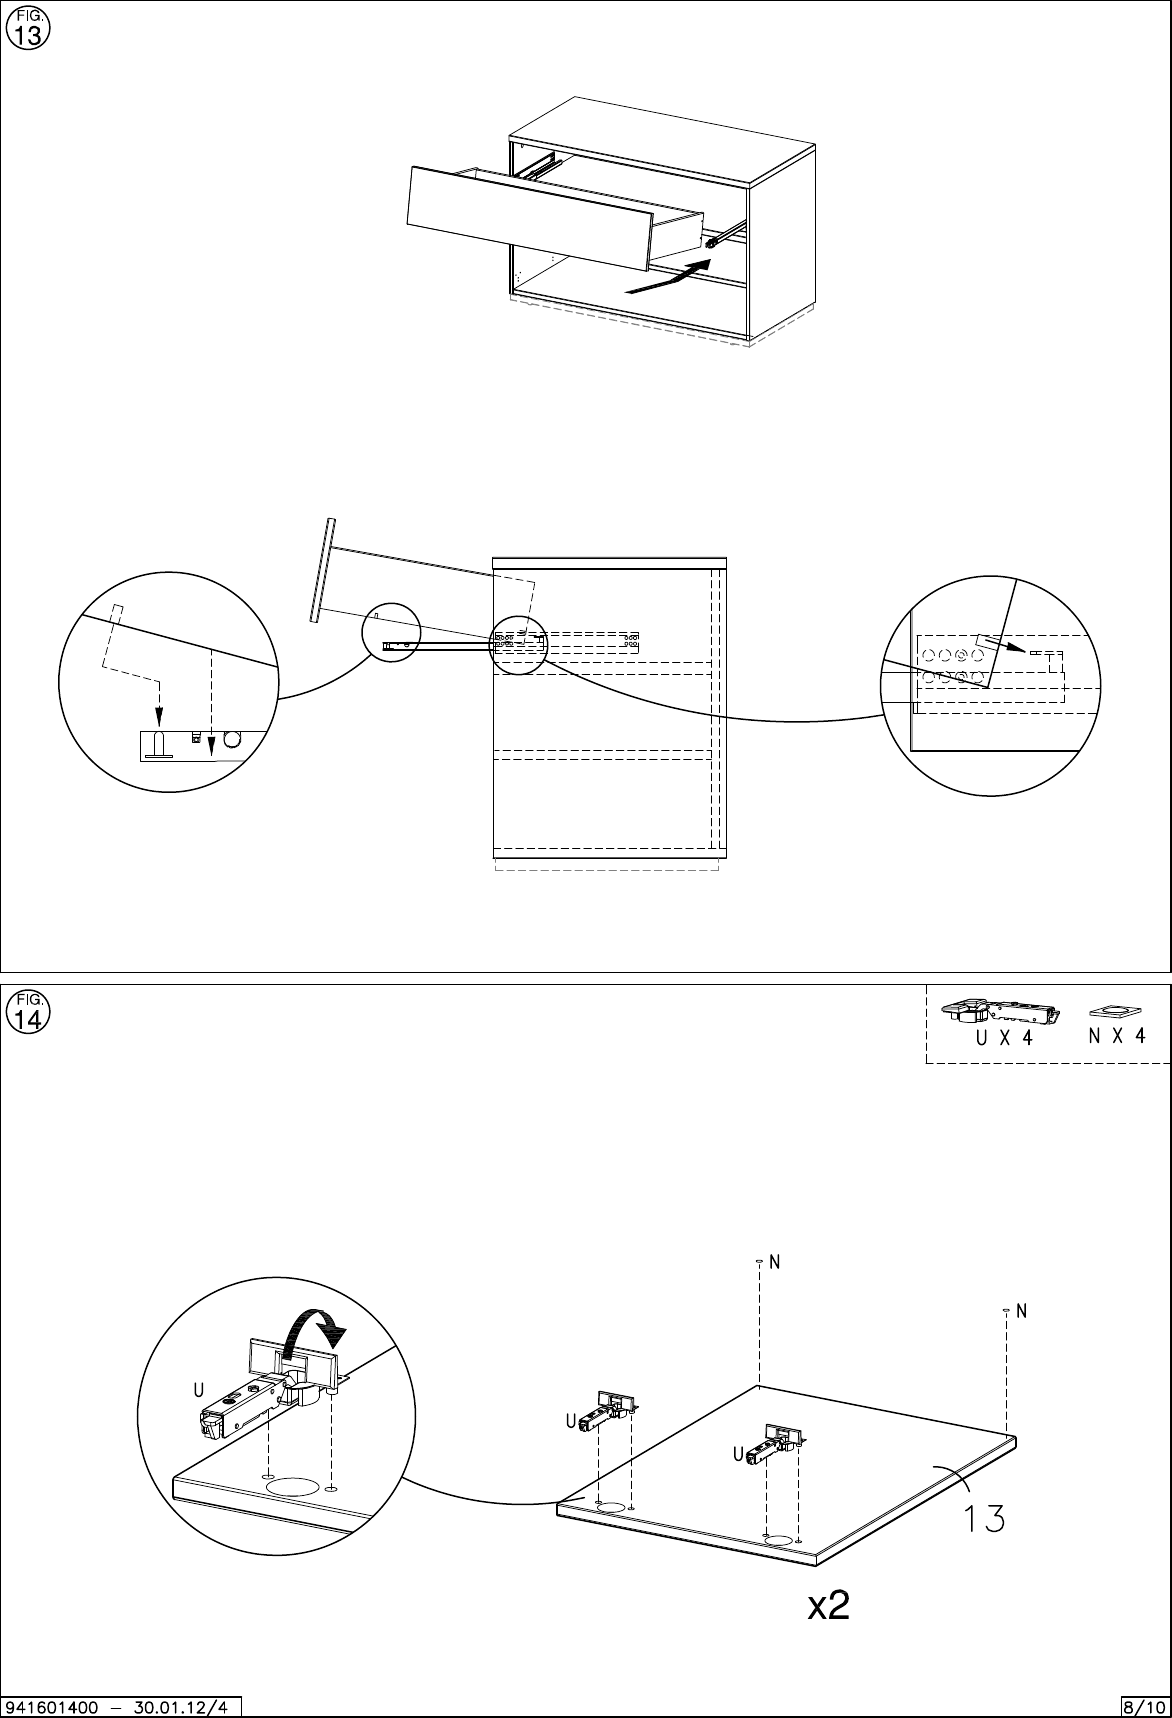 Page 8 of 10 - Boconcept Boconcept--1400-Assembly-Instruction B:\DK_PTA_Share\Inventor Ation\360 Volani\Volani 1400\Assembly Instruction\941601400_v4_10